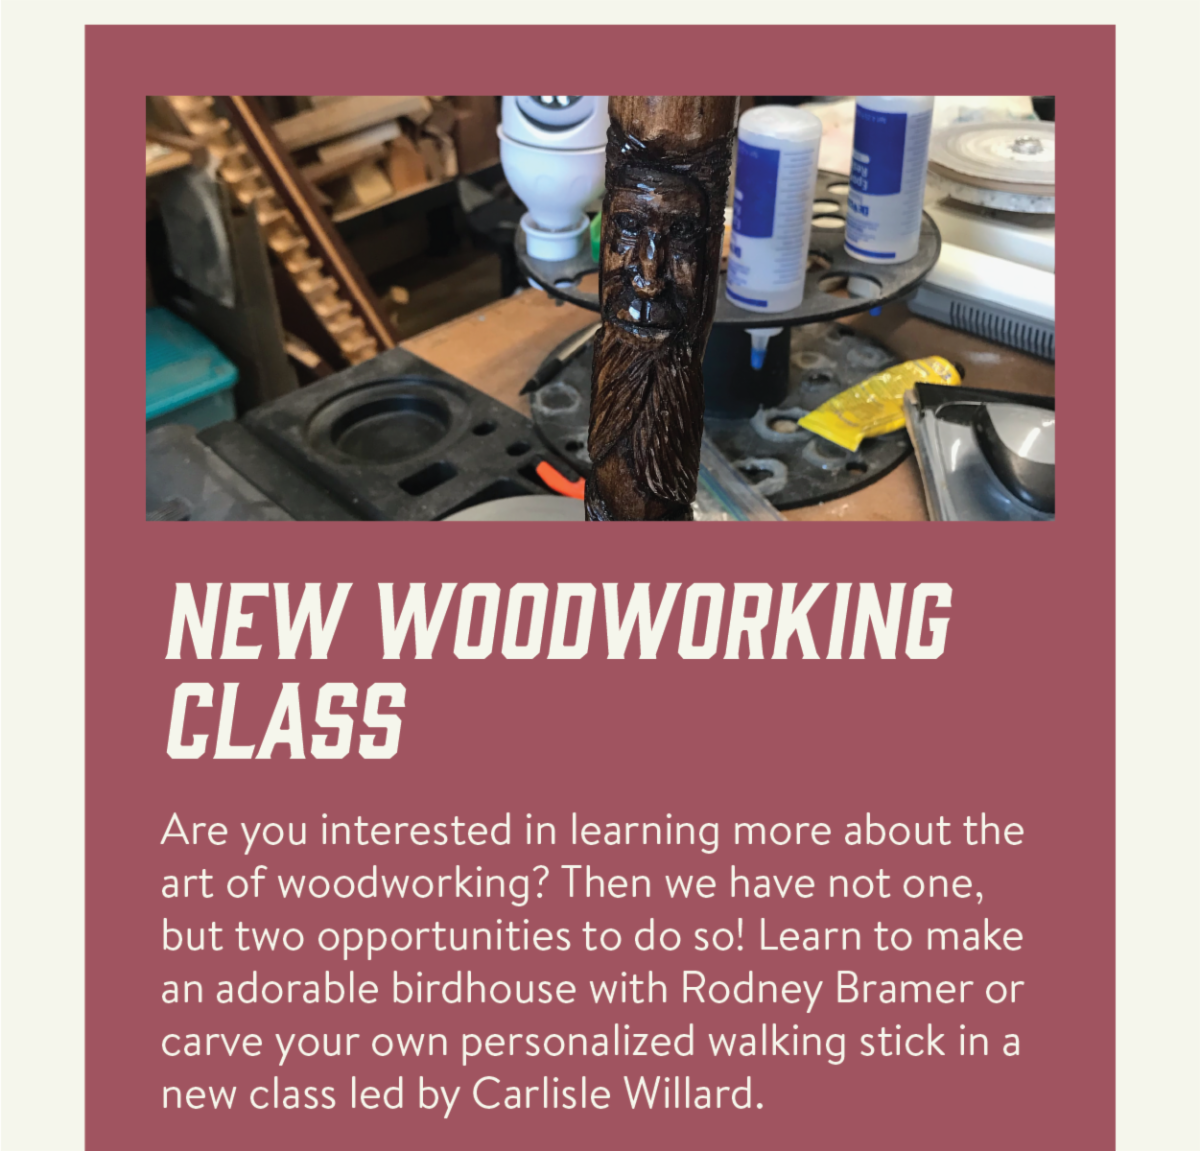 New woodworking class - Are you interested in learning more about the art of woodworking? Then we have not one, but two opportunities to do so! Learn to make an adorable birdhouse with Rodney Bramer or carve your own personalized walking stick in a new class led by Carlisle Willard.